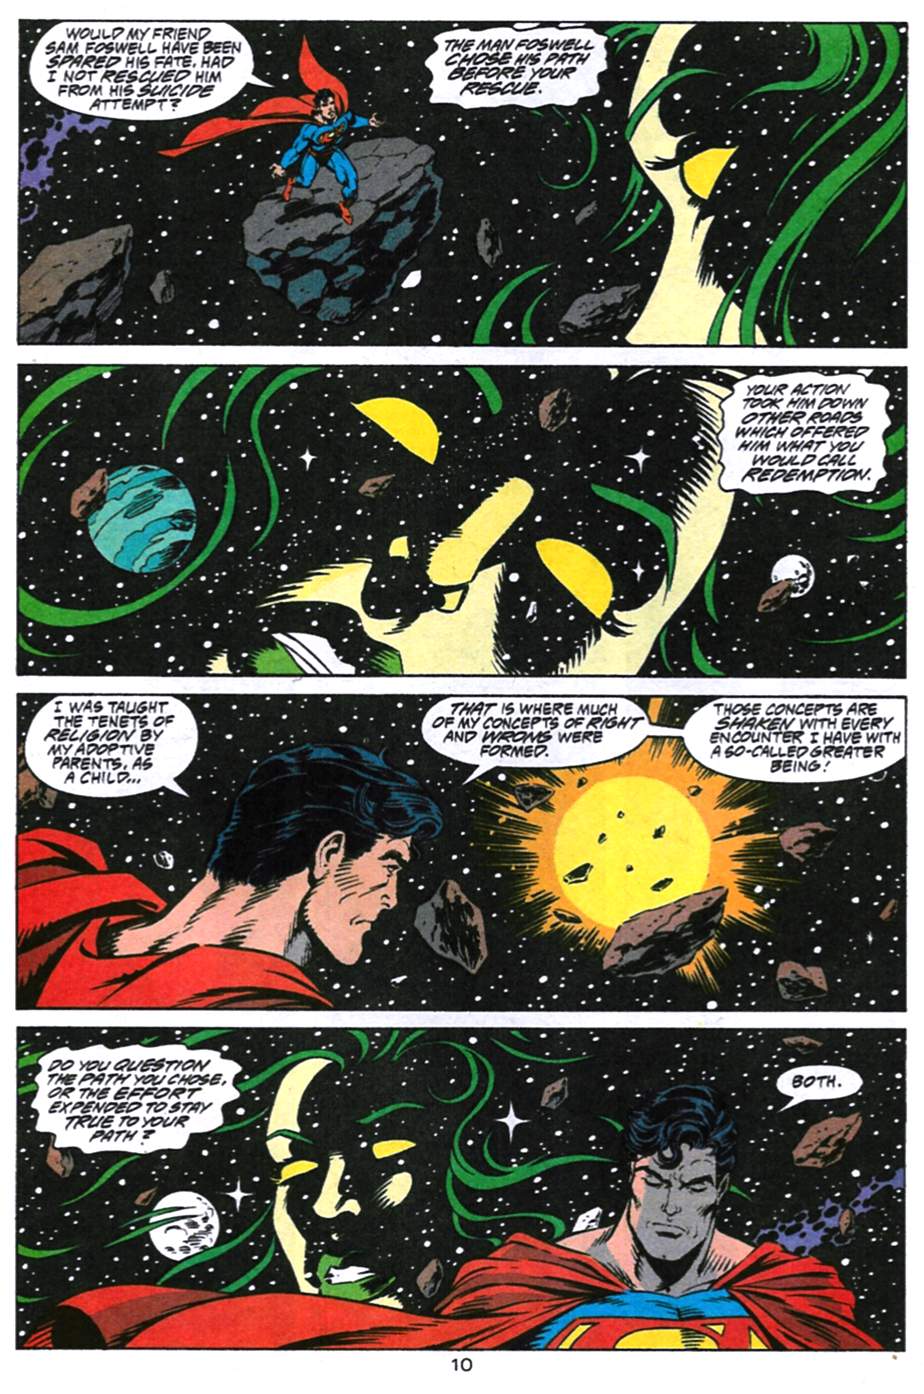 Adventures of Superman (1987) 494 Page 10